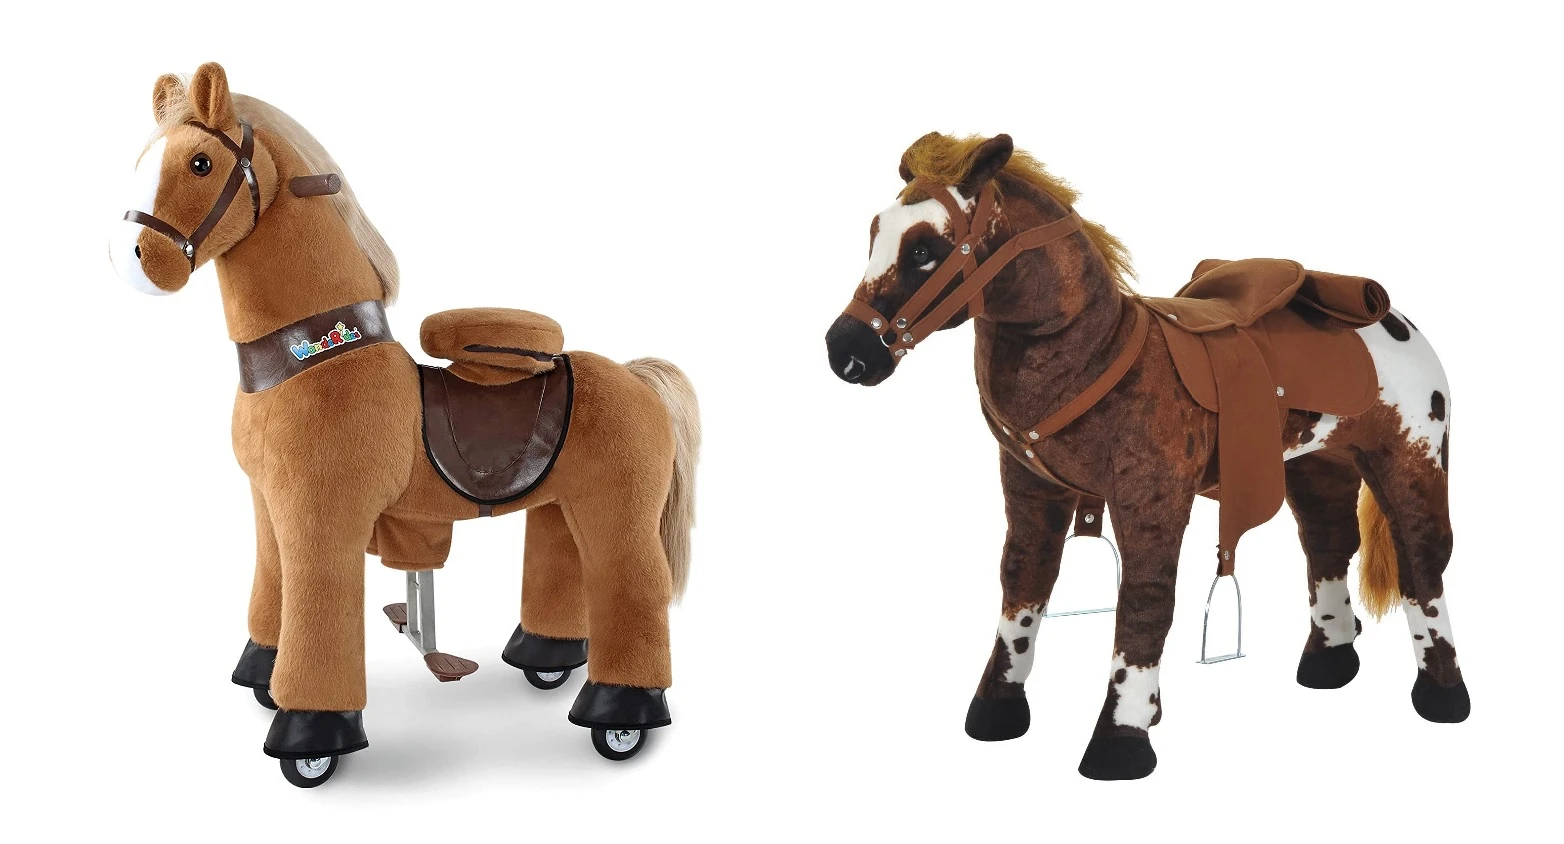 8 Best Ride On Horse Toys With Wheels for Kids